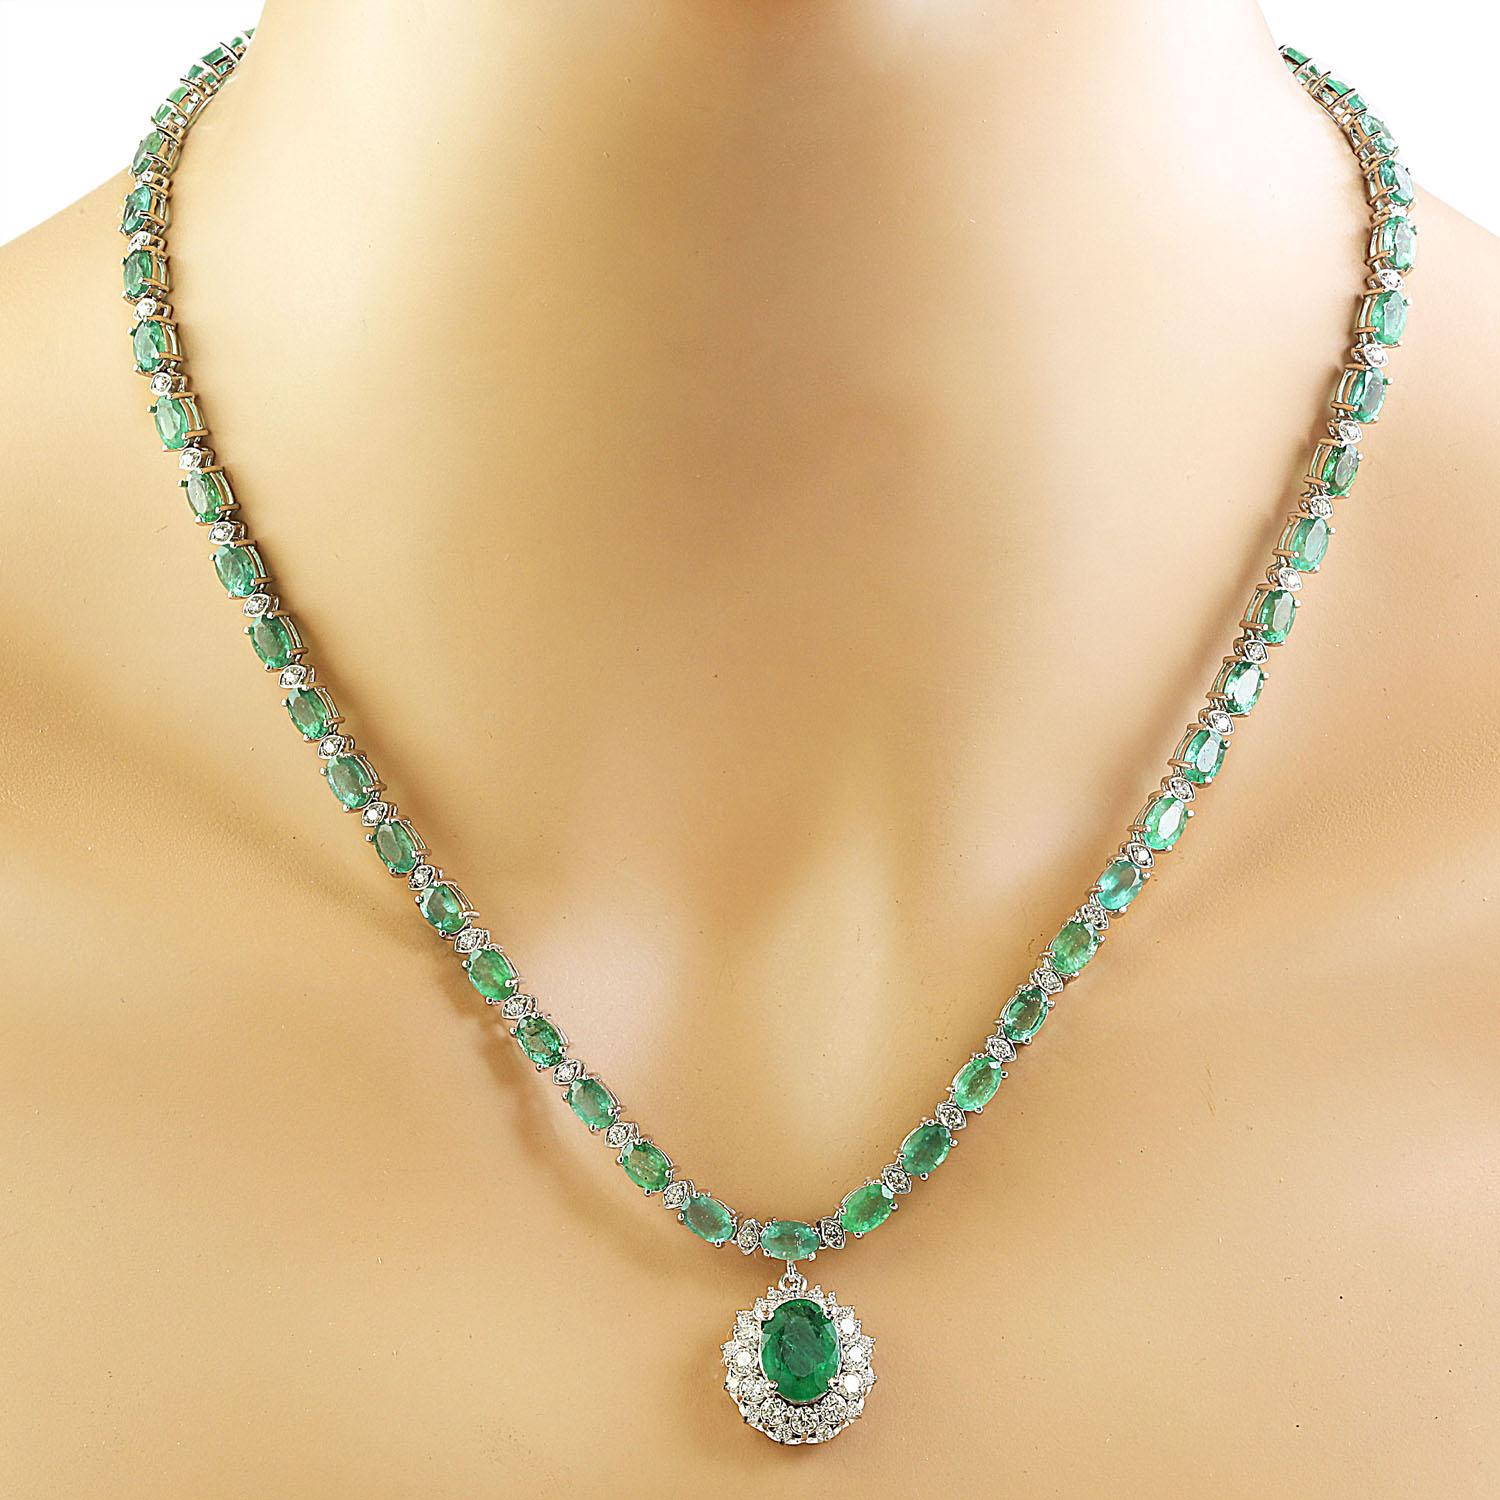 27.16 Carat Natural Emerald 14 Karat Solid White Gold Diamond Necklace
Stamped: 14K
Total Necklace Weight: 27 Grams
Necklace Length: 18 Inches
Center Emerald Weight: 2.22 Carat (11.00x8.00 Millimeters)
Side Emerald weight: 22.62 Carat (6.00x4.00